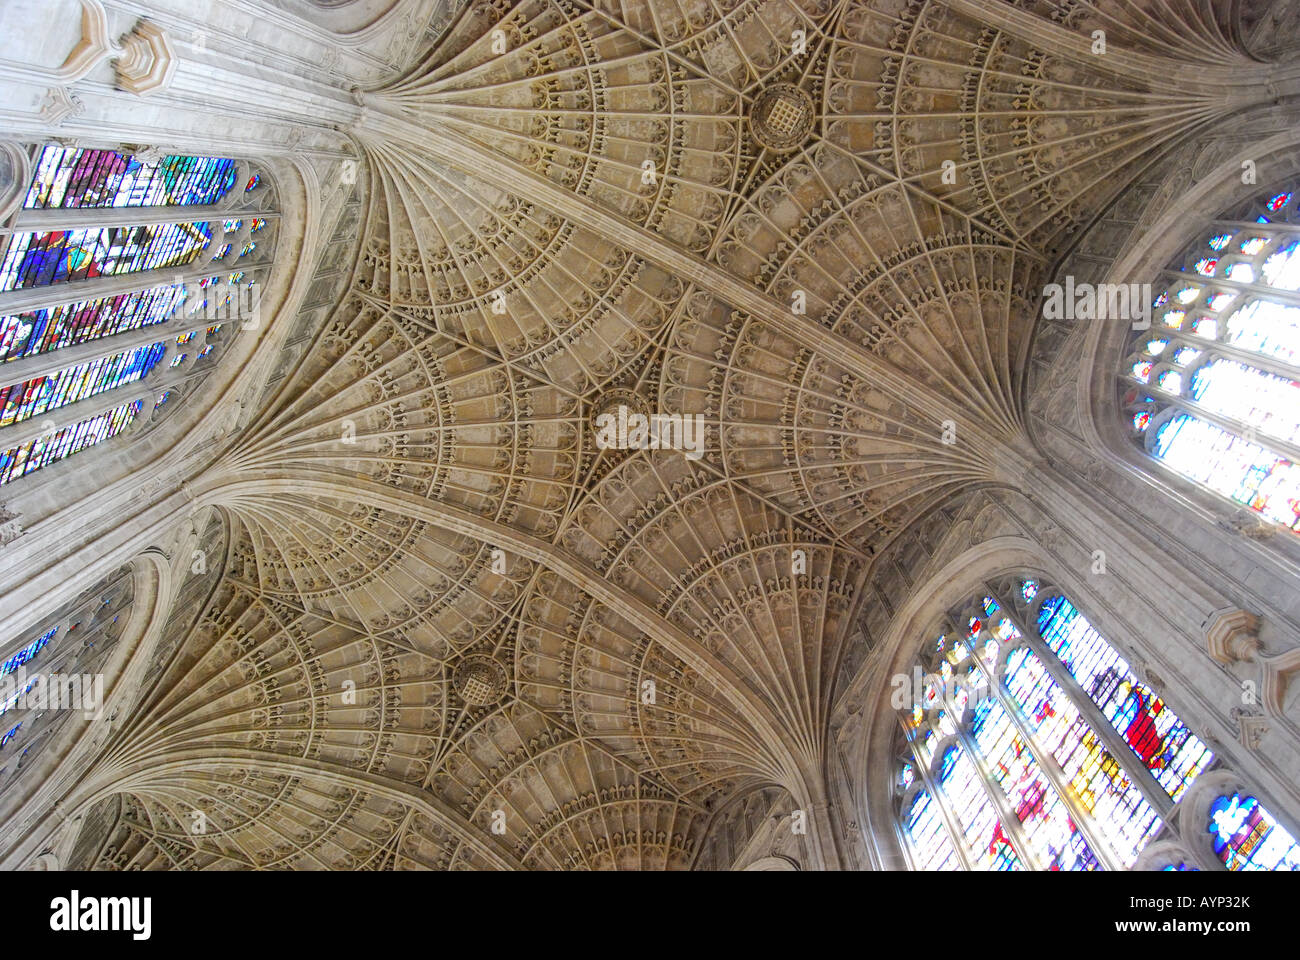 Fan vaulted nave, King's College Chapel, King's College, Cambridge, Cambridgeshire, England, United Kingdom Stock Photo